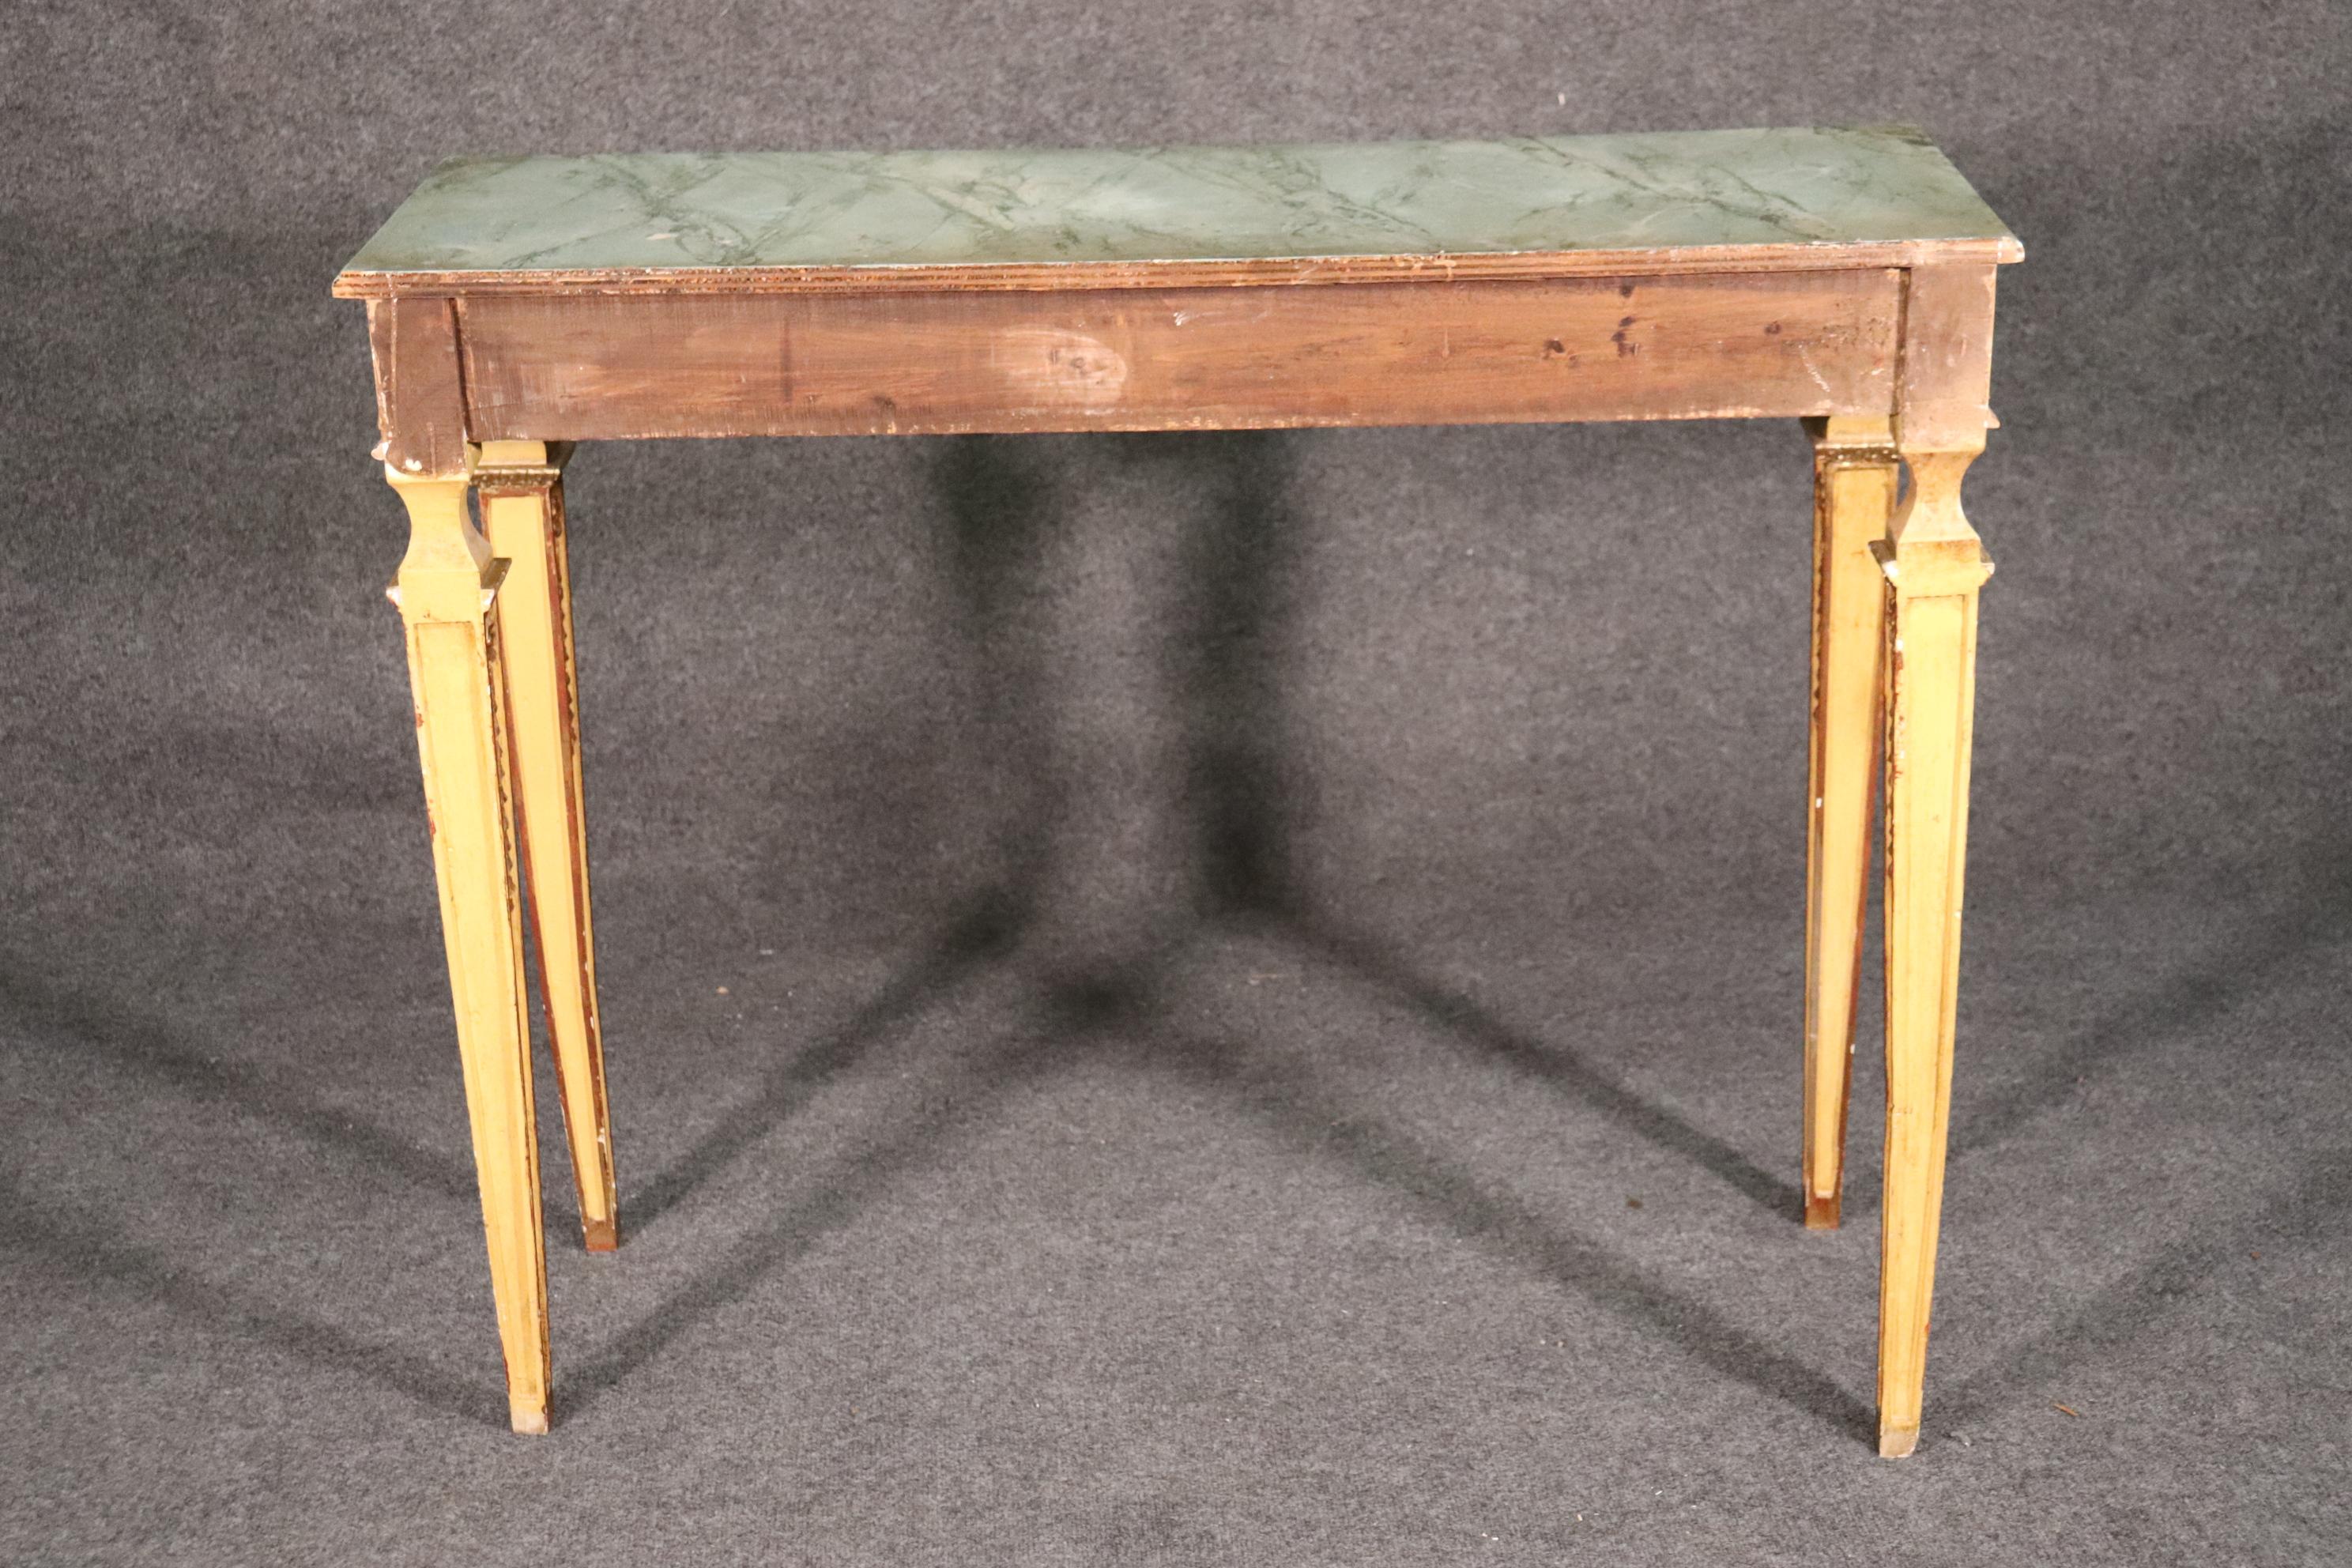 Mid-20th Century Faux Marble Paint Decorated French Regency Console Table in Creme Paint and Gilt For Sale